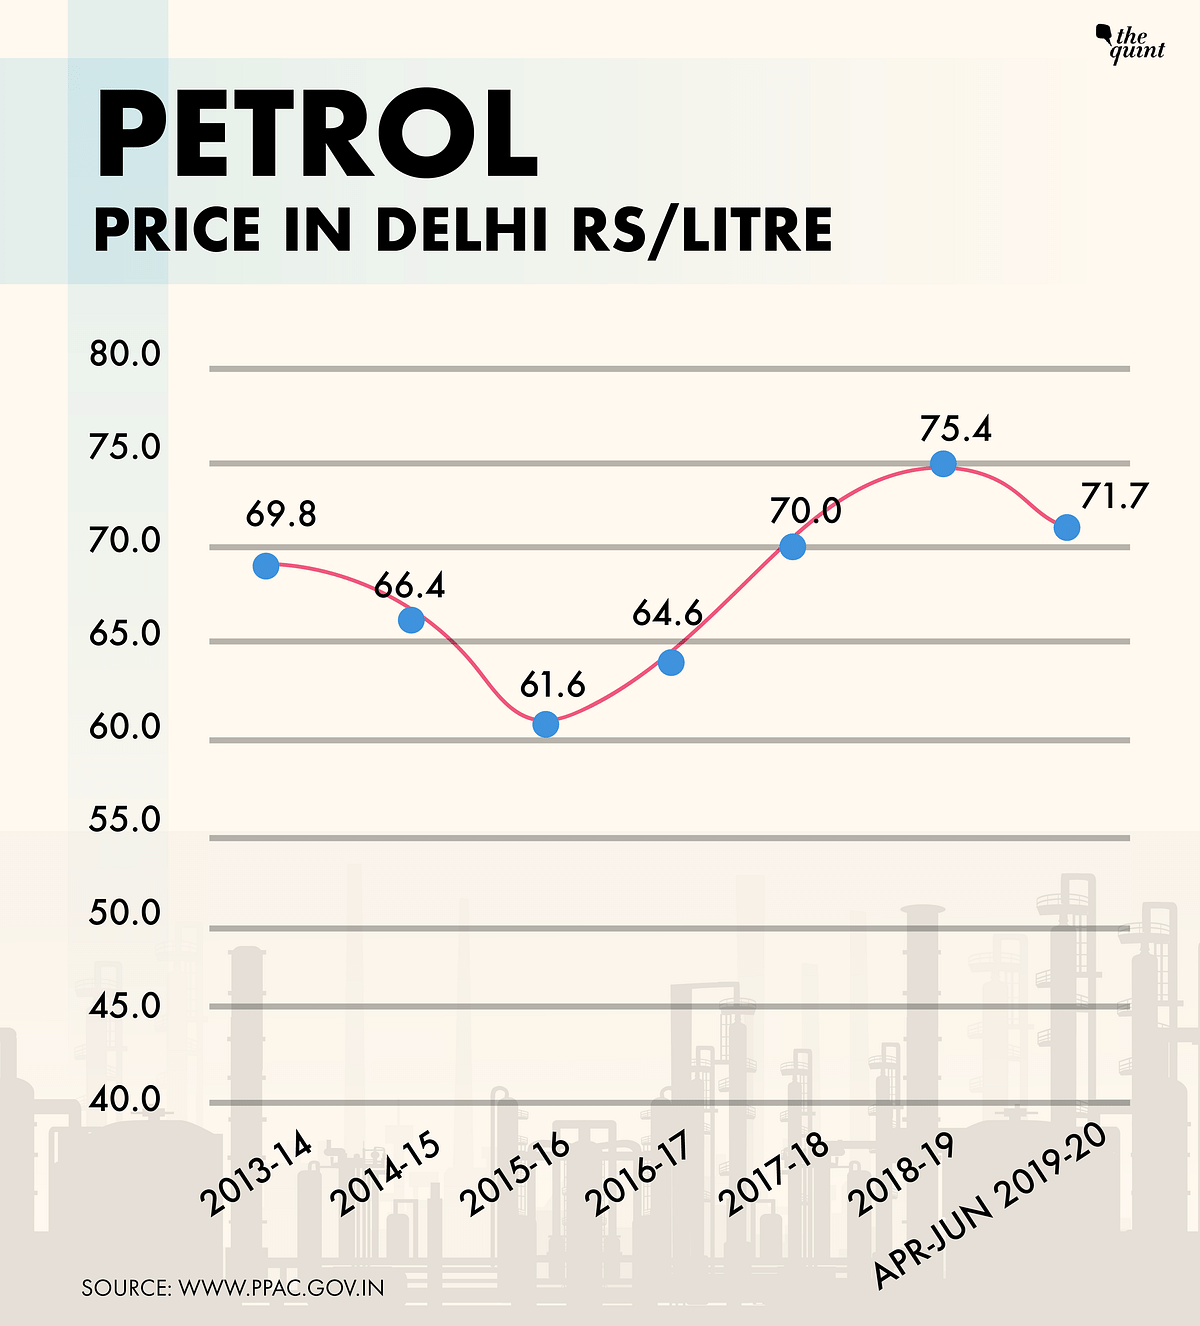 Lady luck keeps smiling on Modi, and crude oil prices come to the rescue again, writes Amitabh Tiwari. 